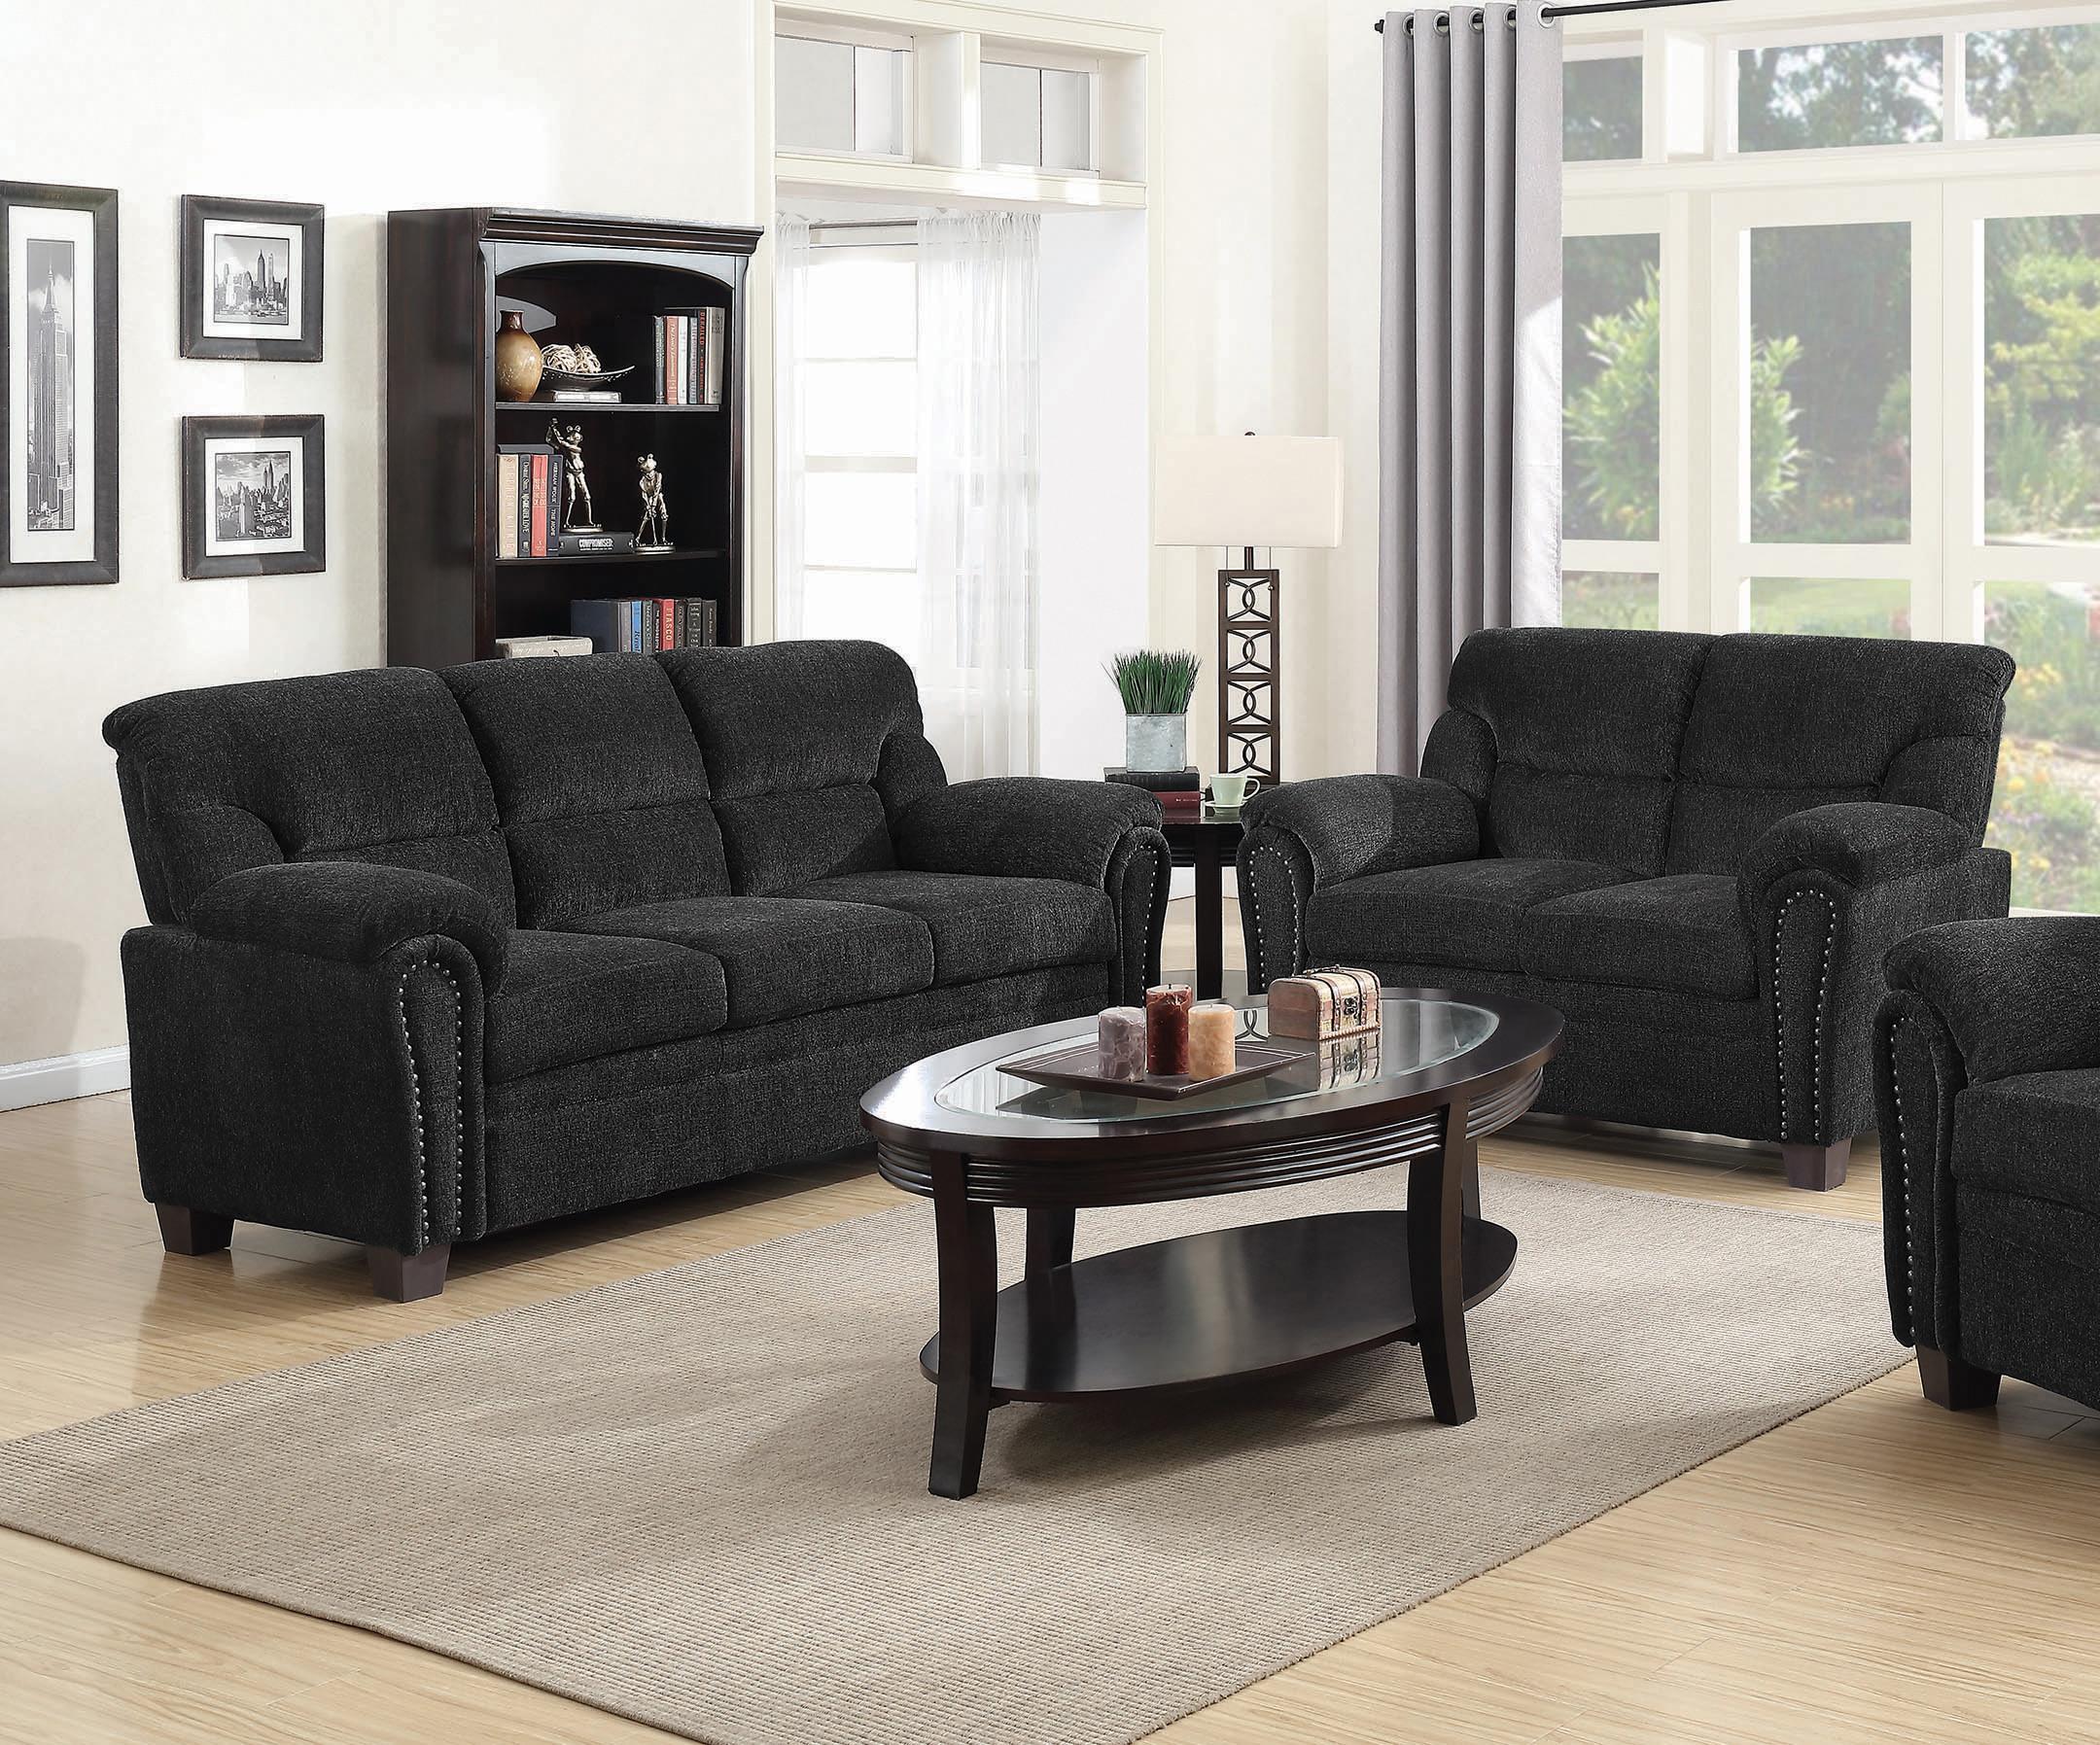 Transitional Living Room Set 506574-S2 Clemintine 506574-S2 in Graphite Chenille